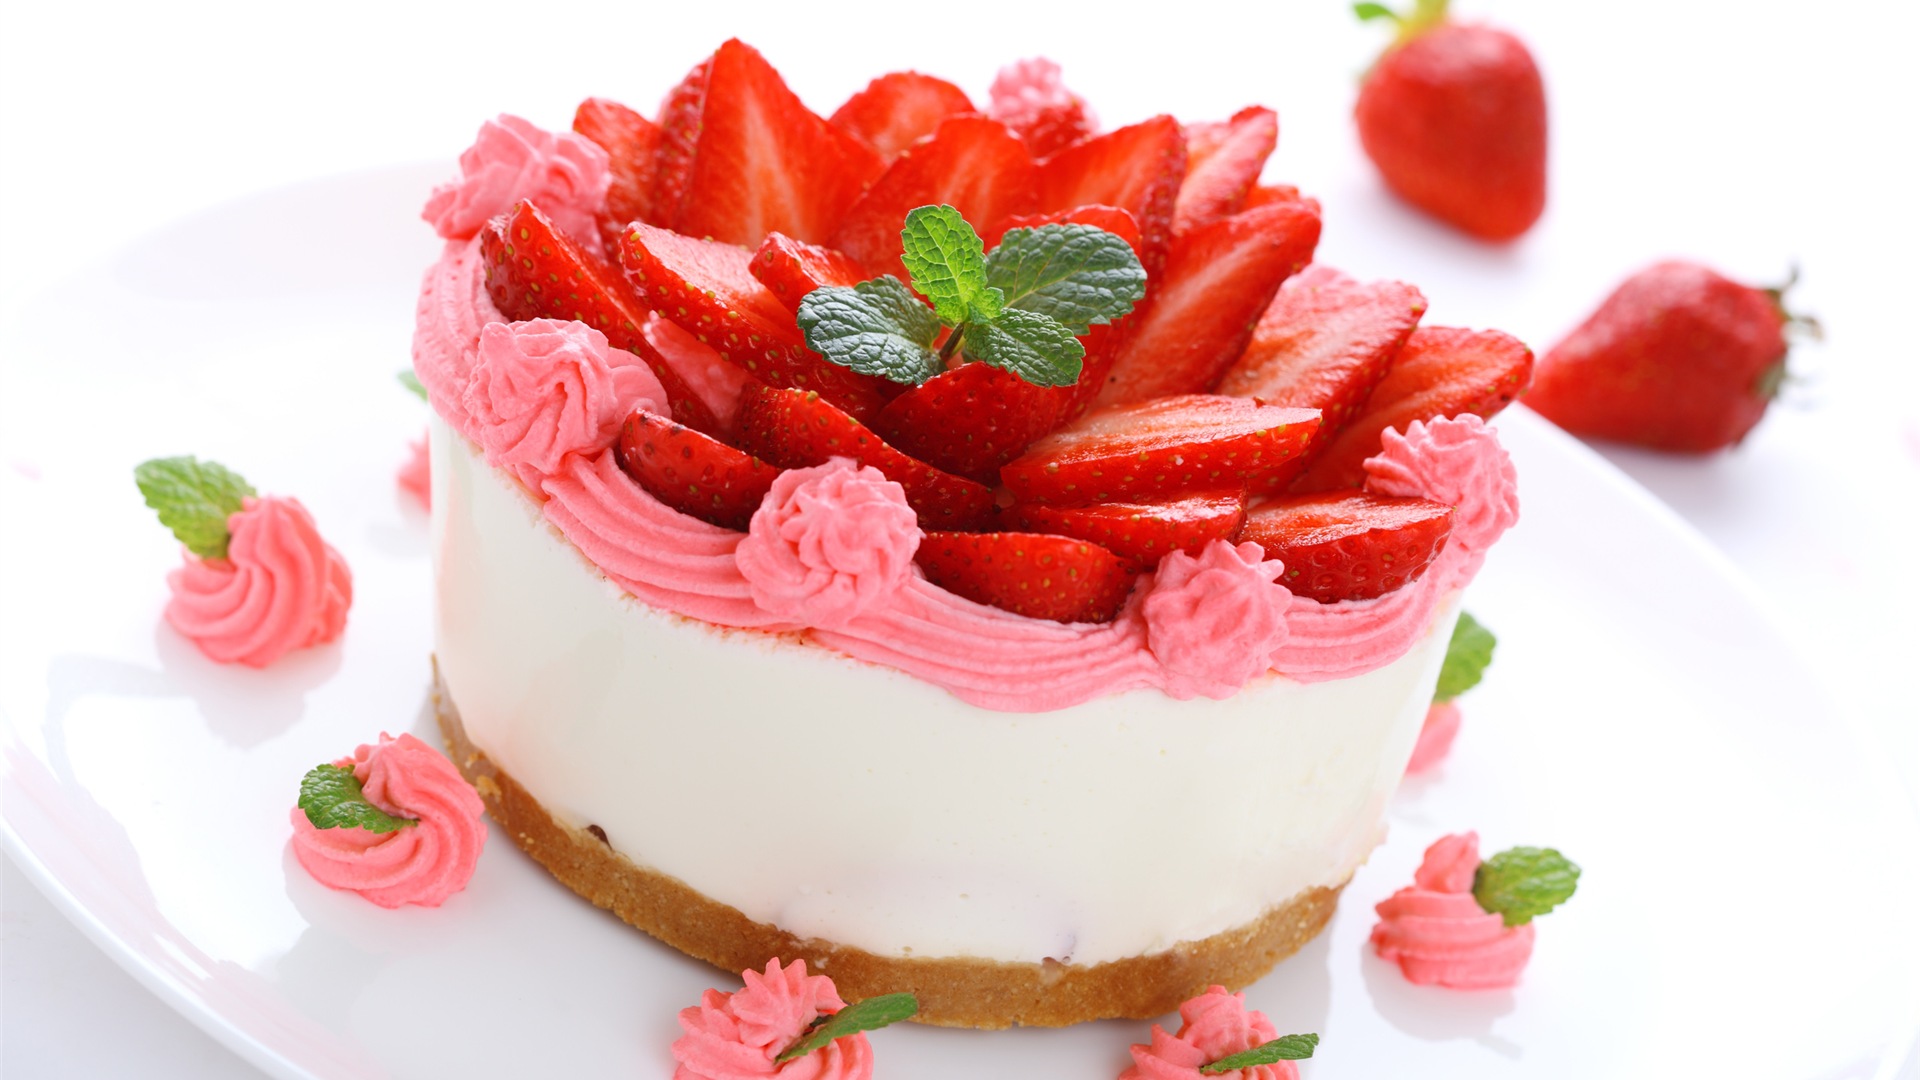 Delicious strawberry cake HD wallpapers #14 - 1920x1080